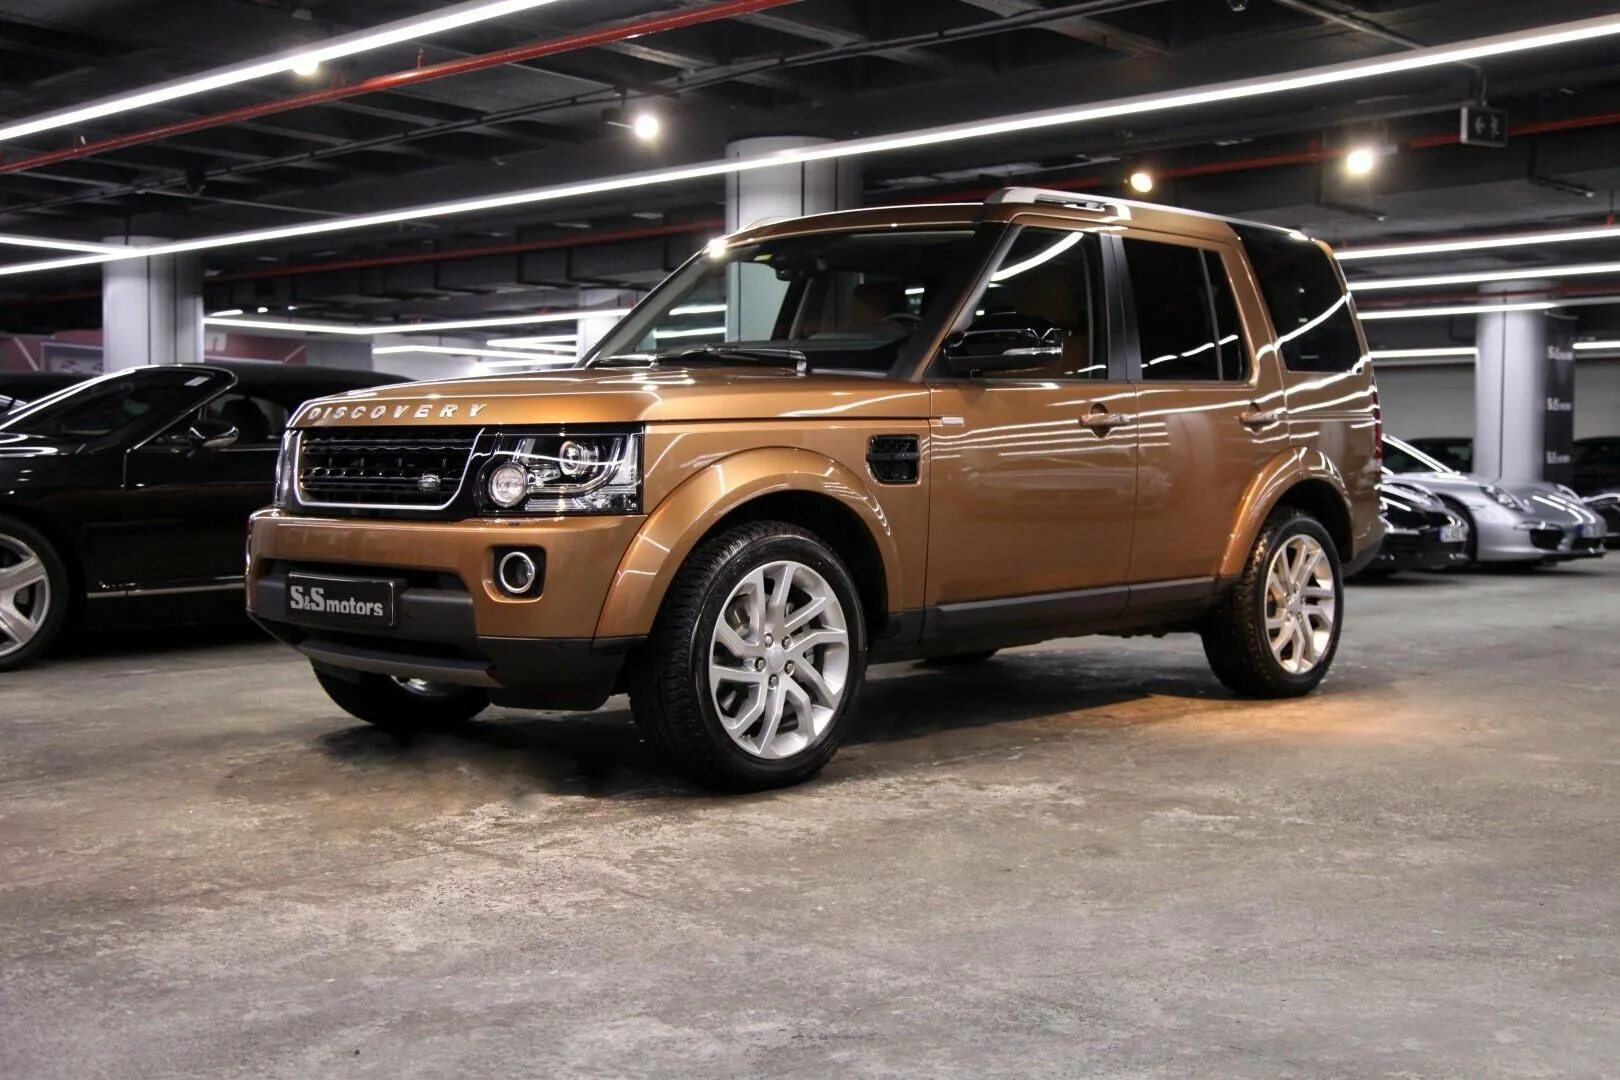 Land Rover Discovery 4. Land Rover Discovery 4 landmark. Land Rover Discovery 3 2016. Ленд Ровер Дискавери 4 2016. Дискавери 0